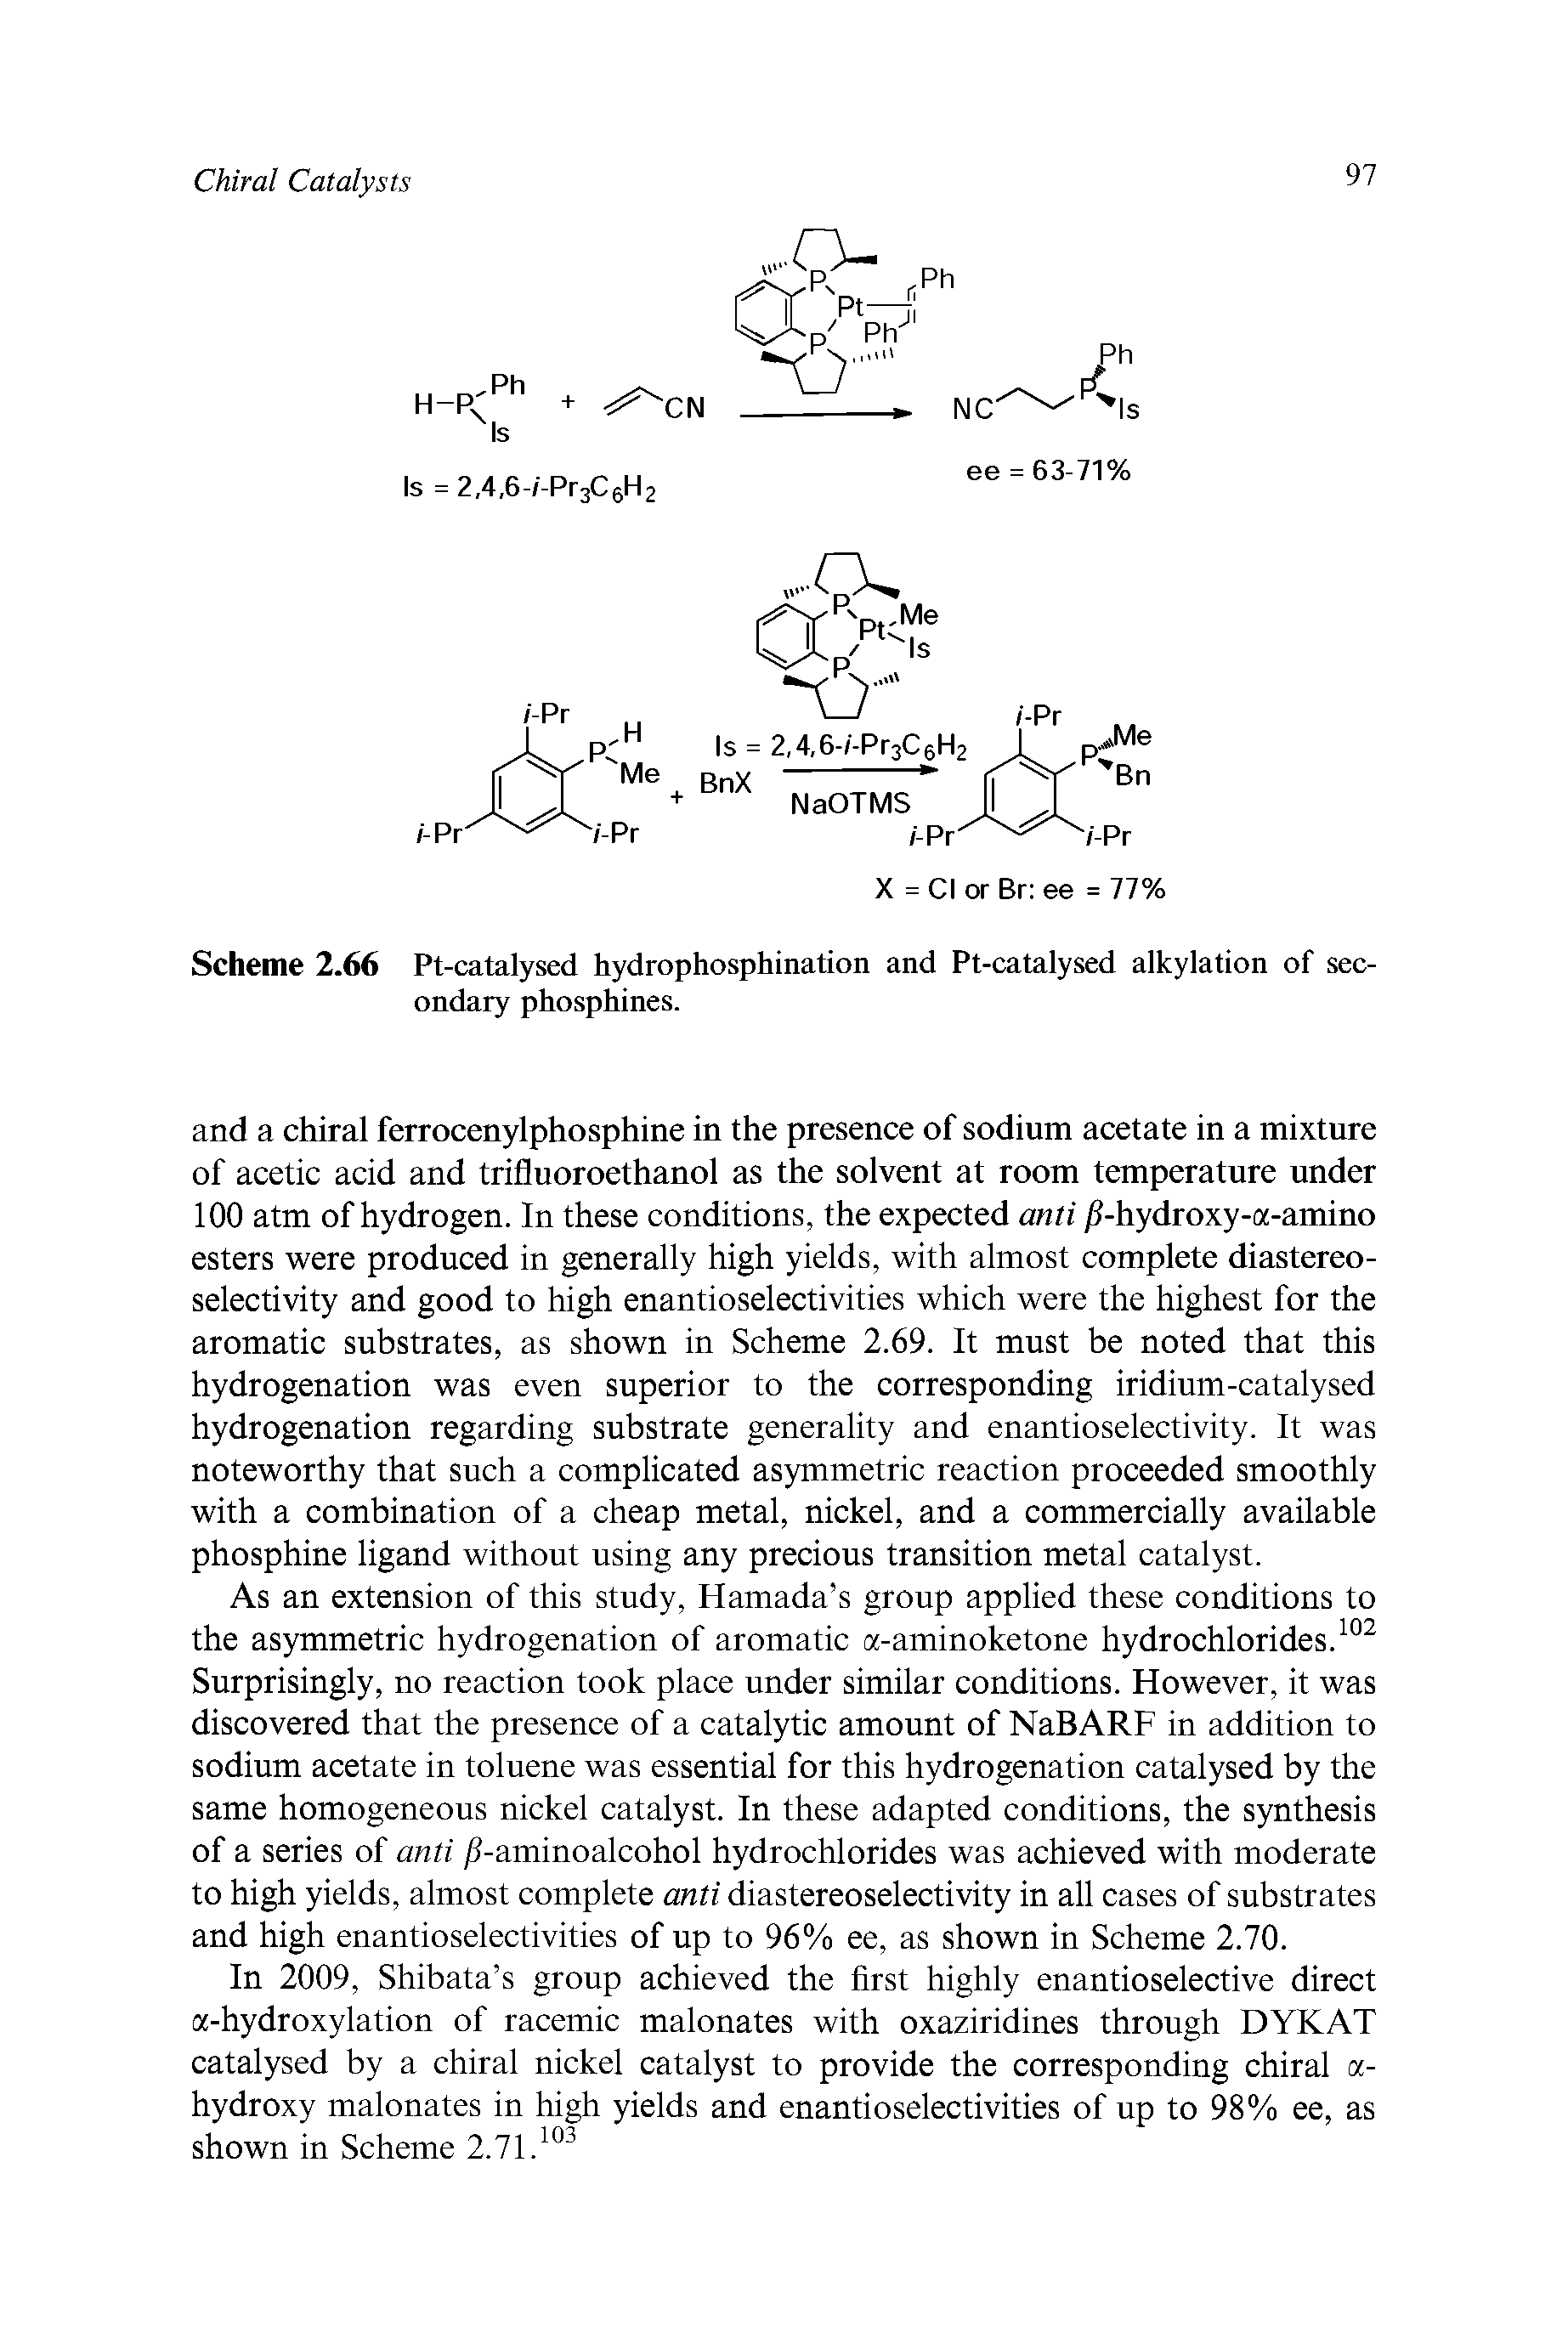 Scheme 2.66 Pt-catalysed hydrophosphination and Pt-catalysed alkylation of secondary phosphines.